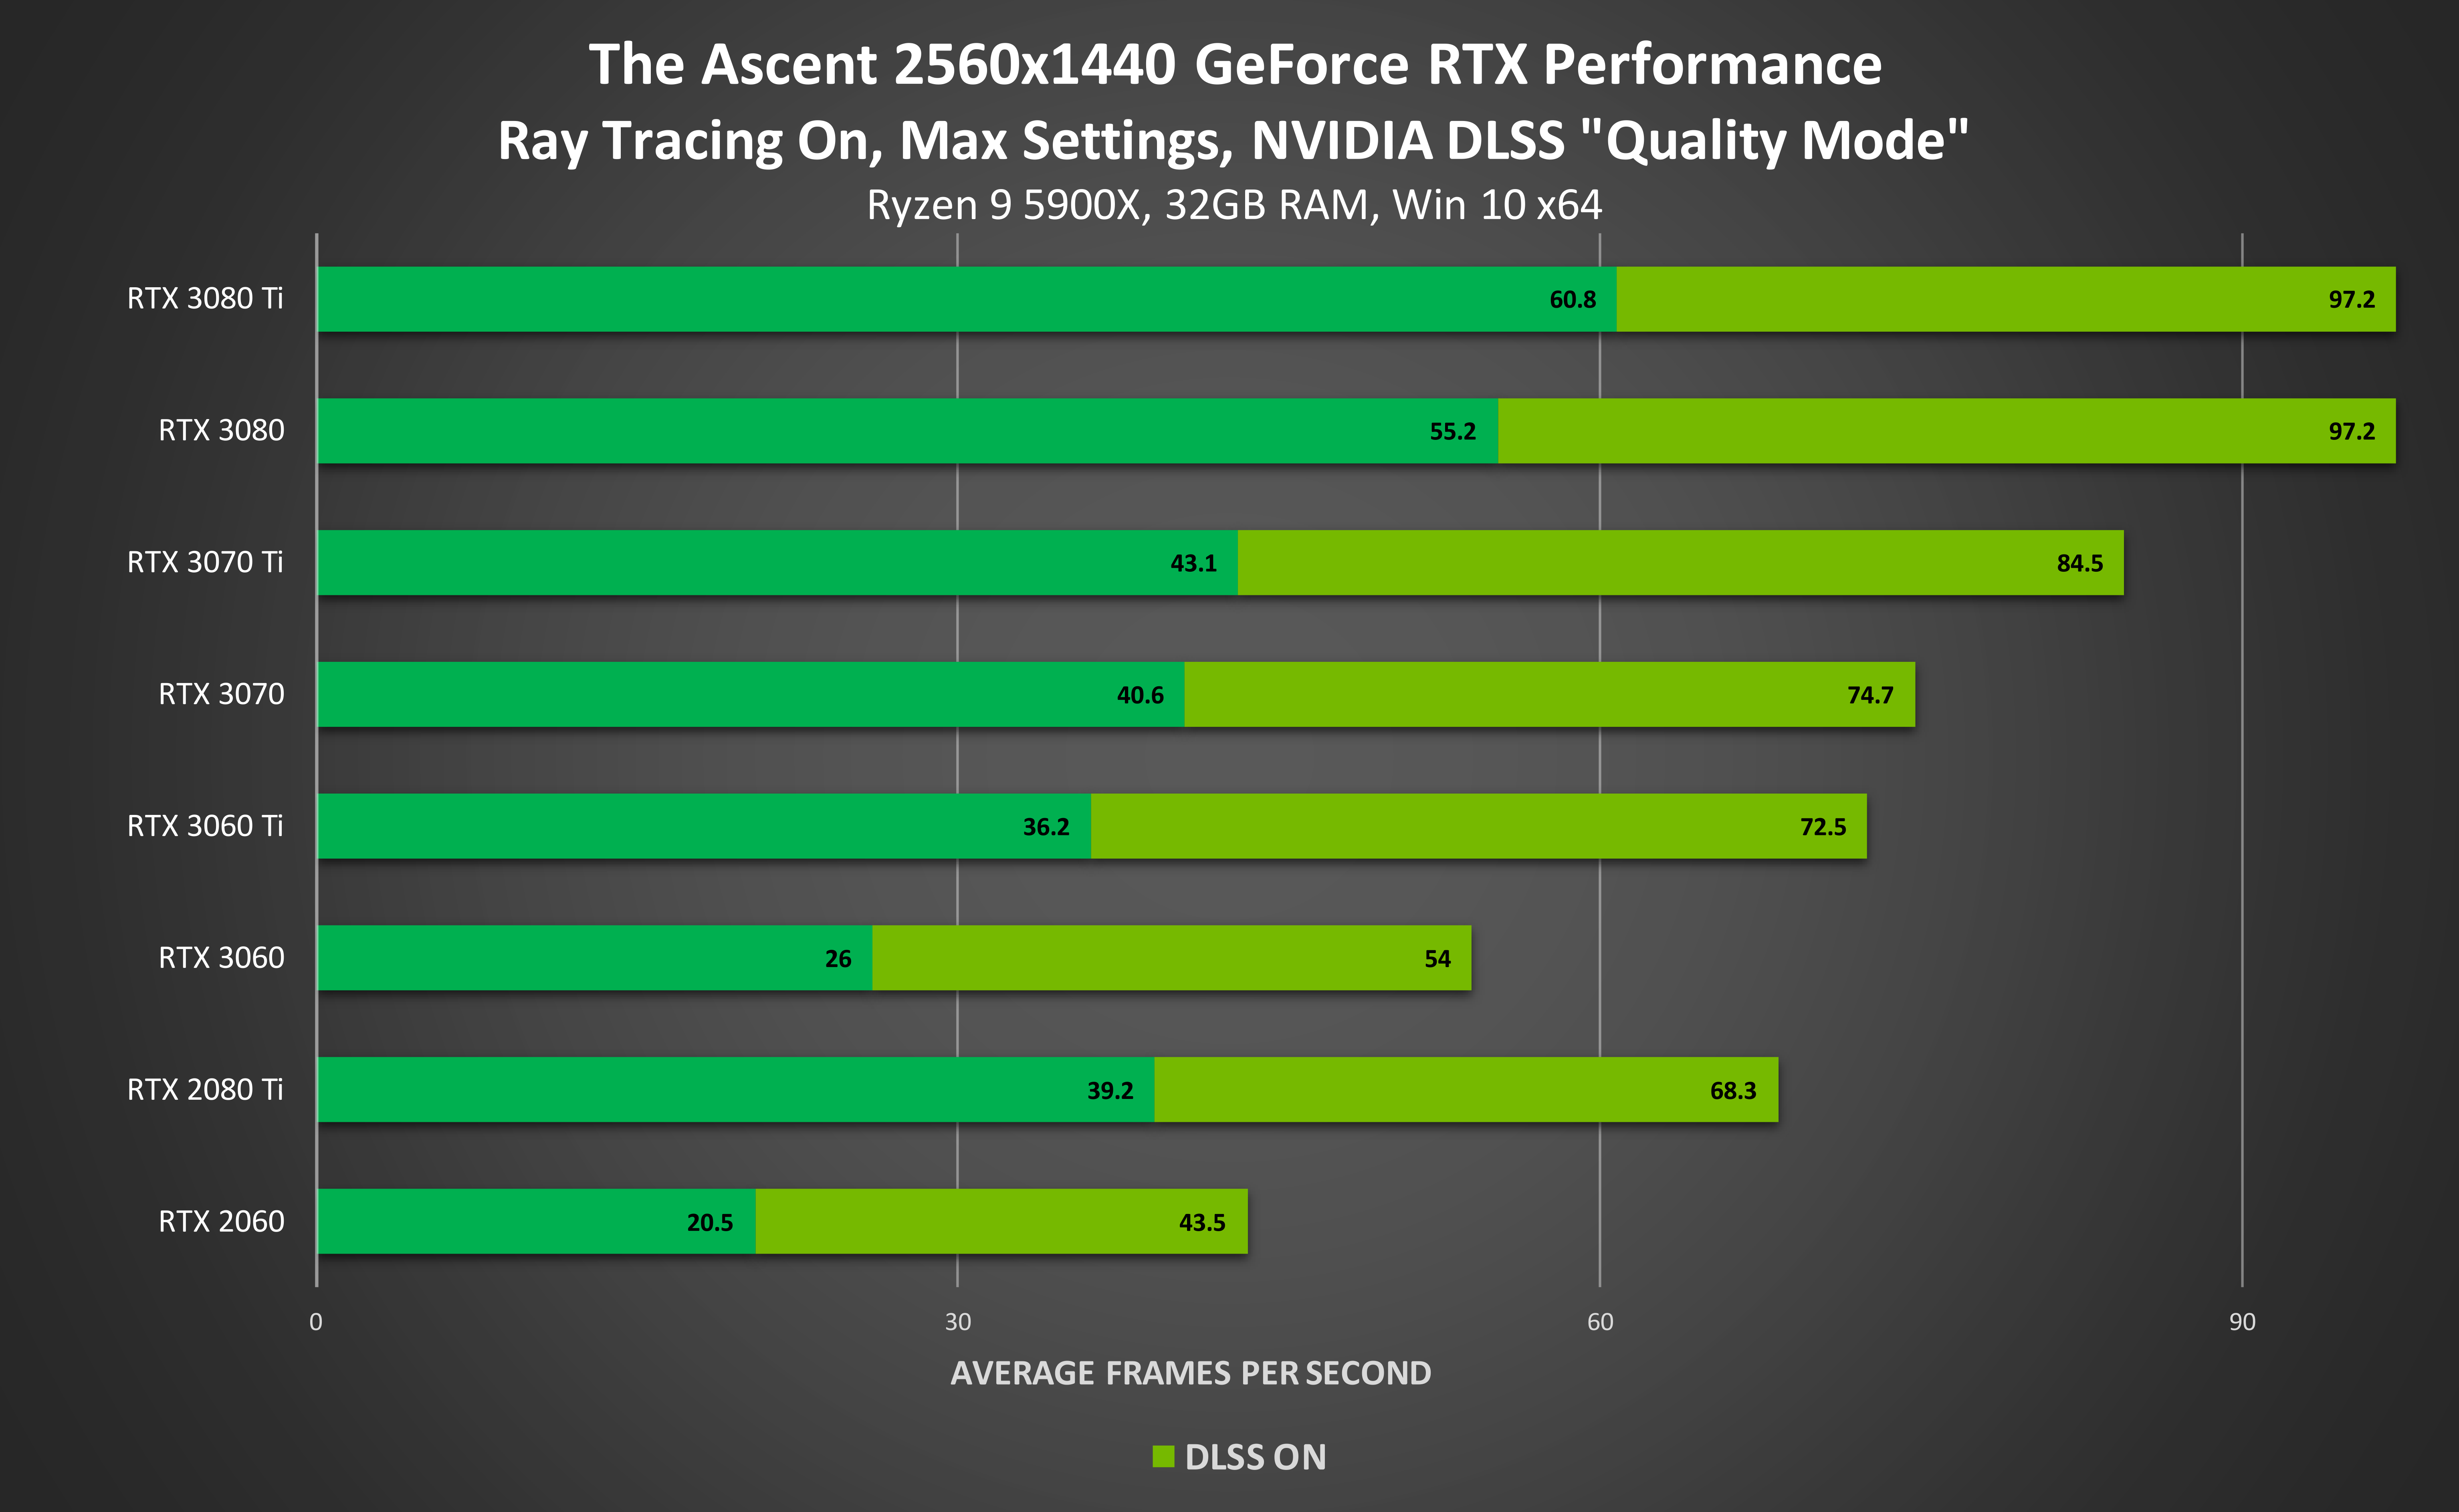 New 'The Day Before' 4K Trailer Shows Graphics Difference When Using  GeForce RTX—Ray-Tracing Support Confirmed